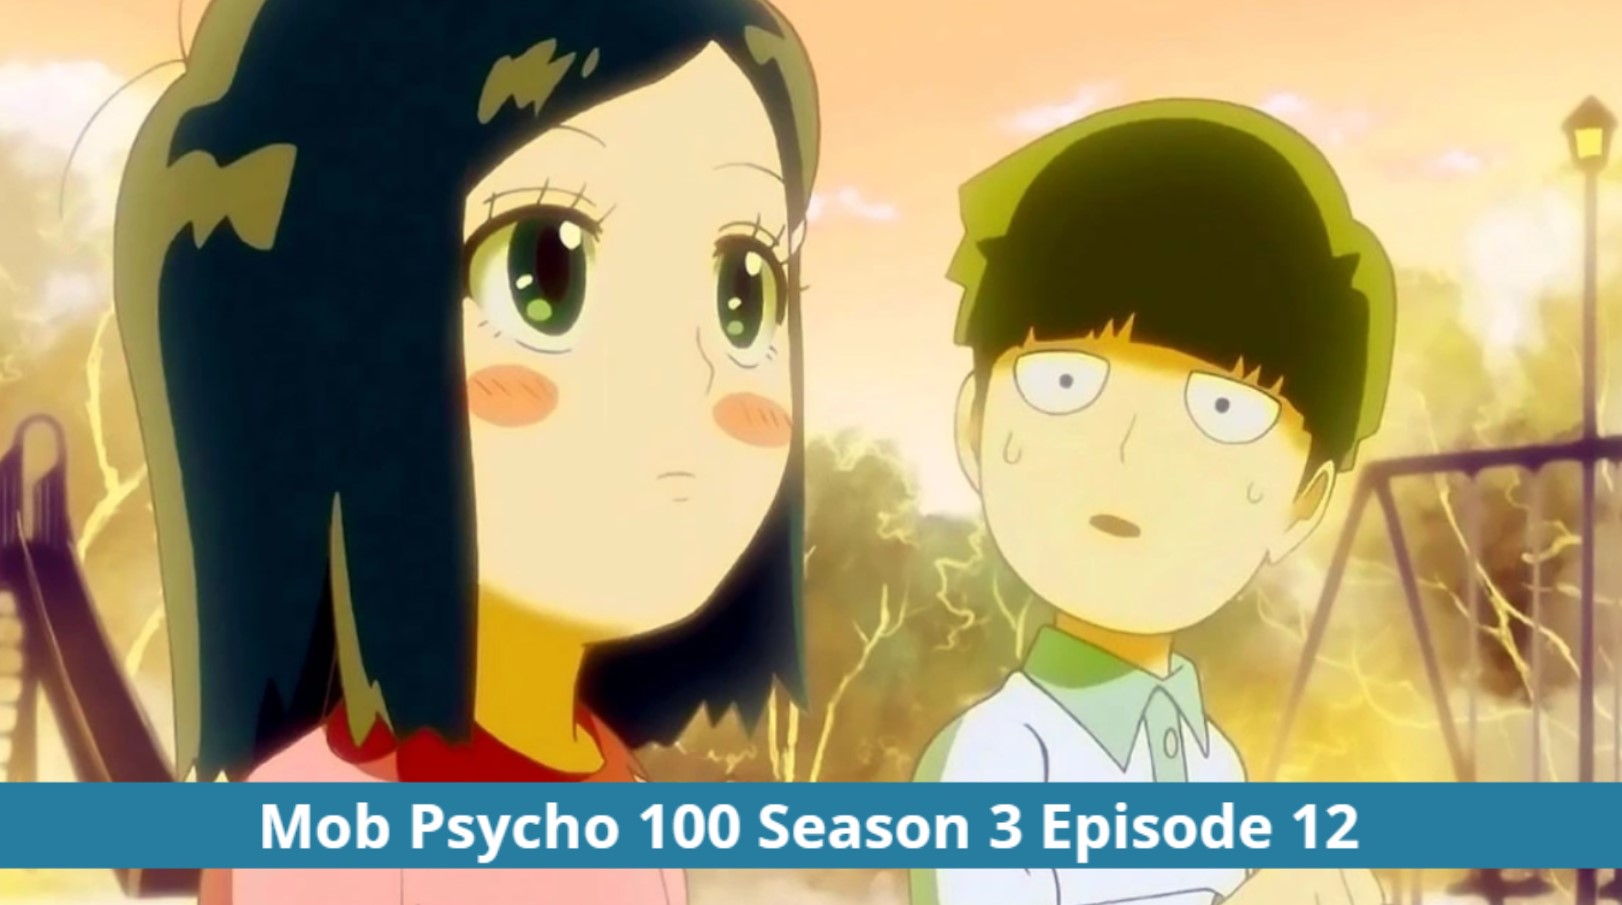 Mob Psycho 100 Season 3 Episode 12 review: The truth unveiled - Dexerto